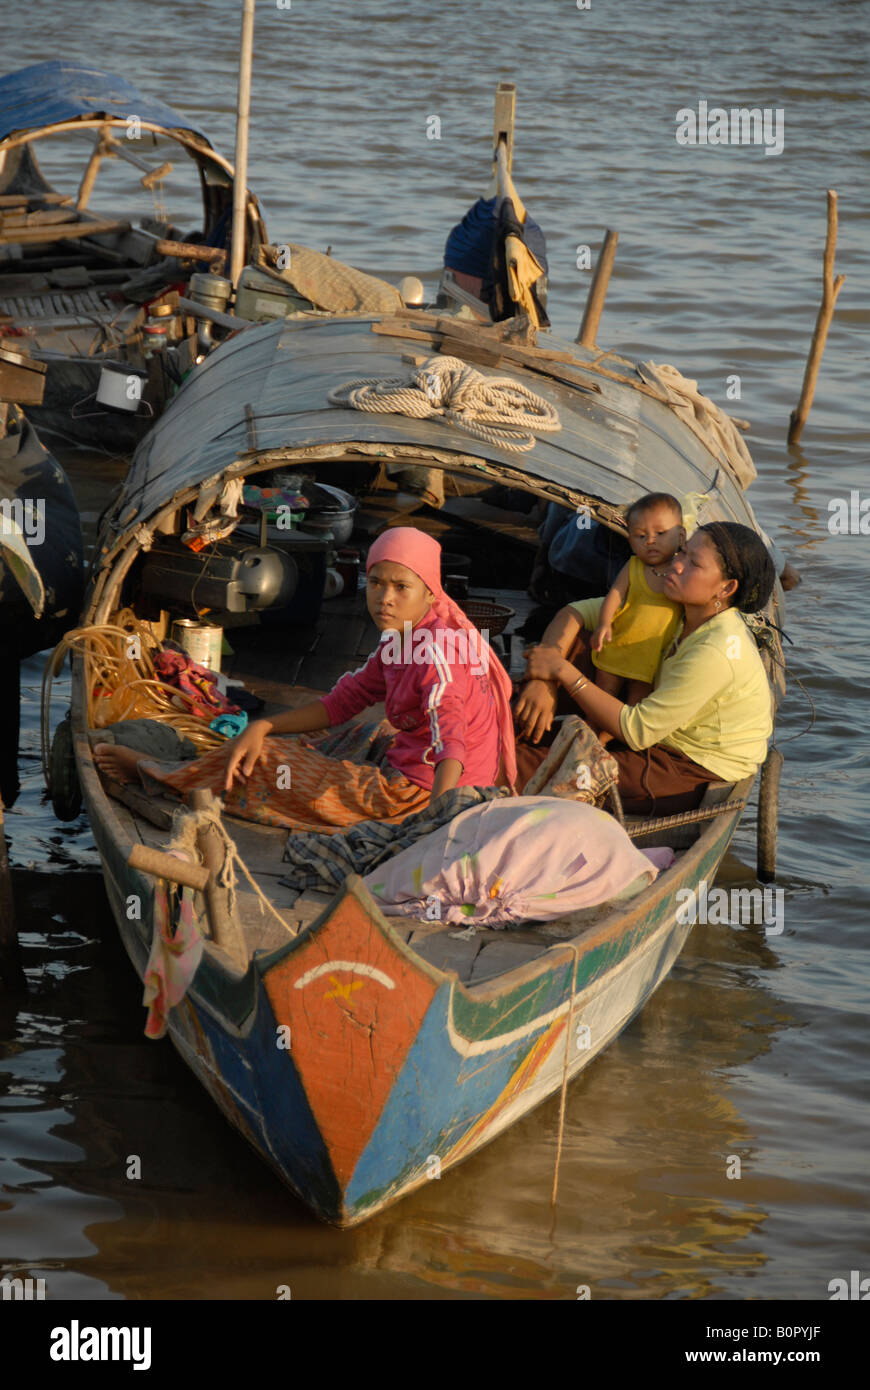 khmer muslims at their boat house in mekong river Stock Photo